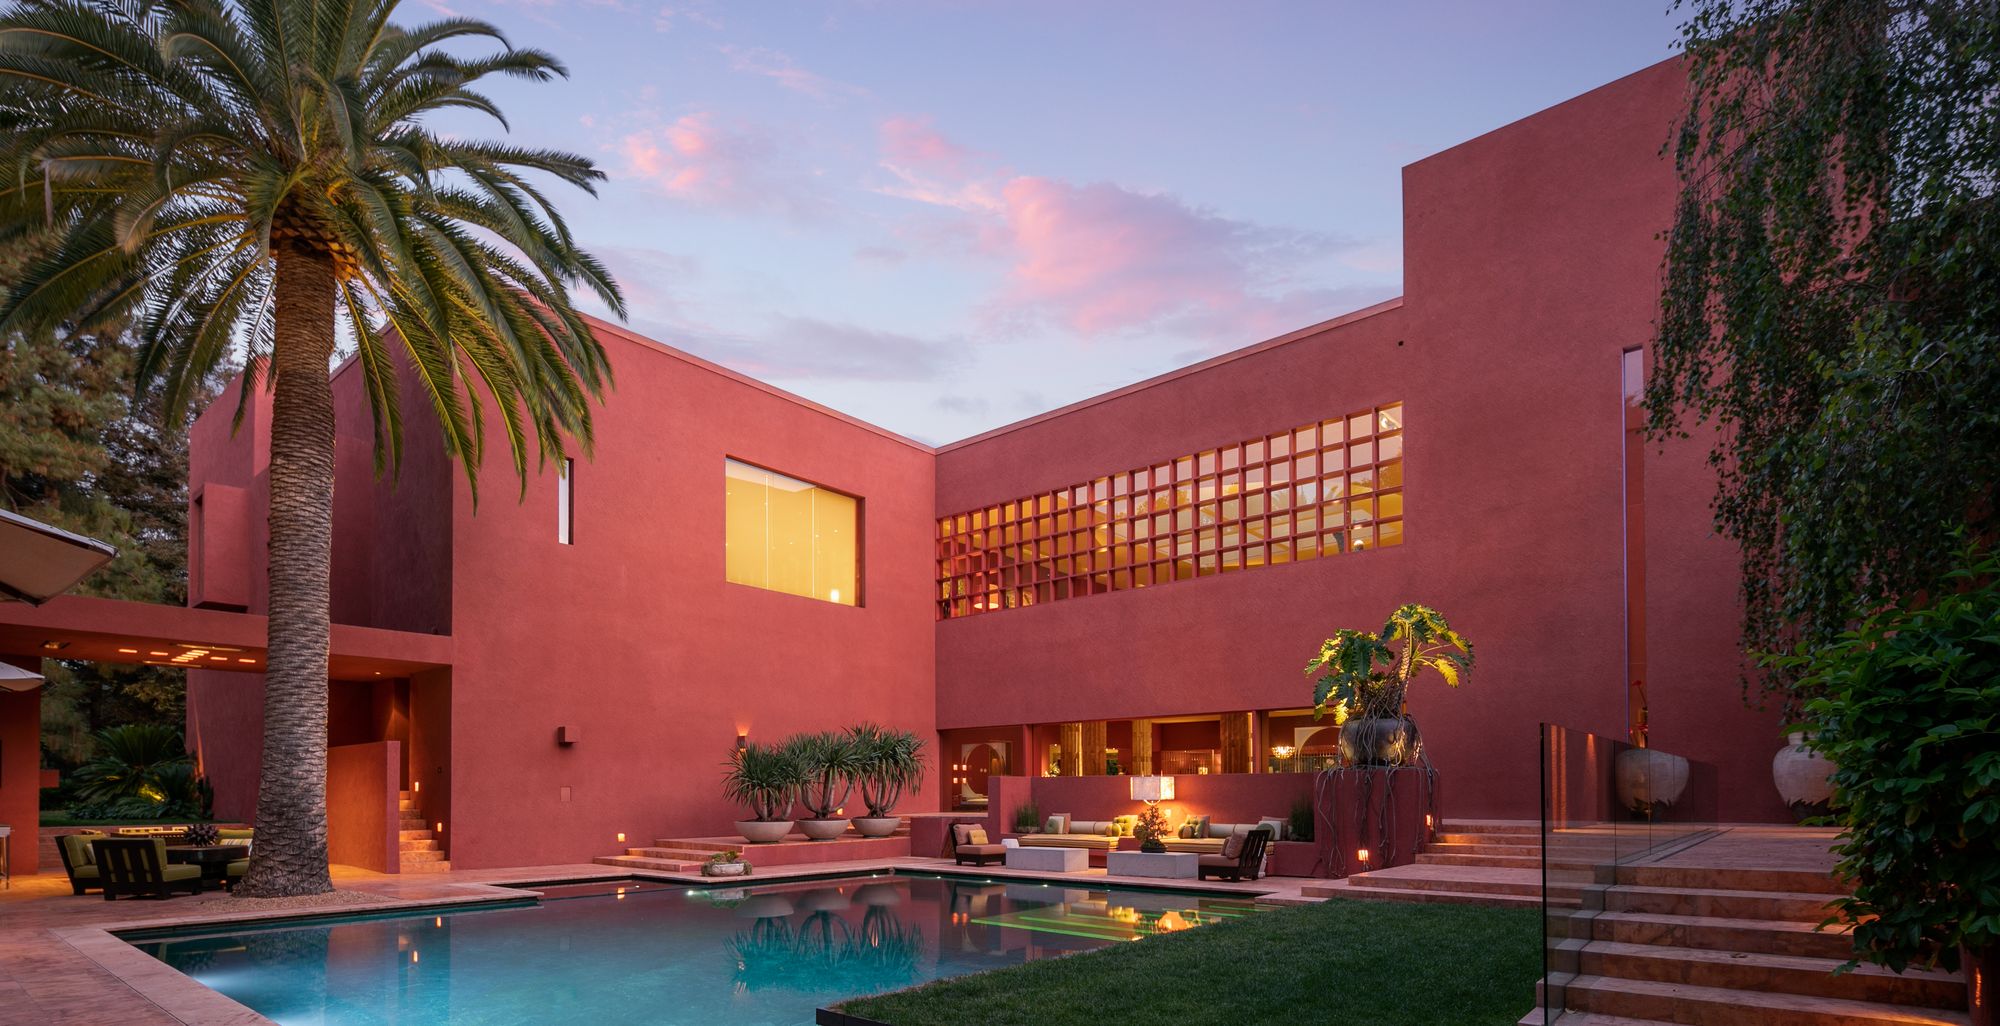 Photo of a pool surrounded by red walls in a Ricardo Legorreta home